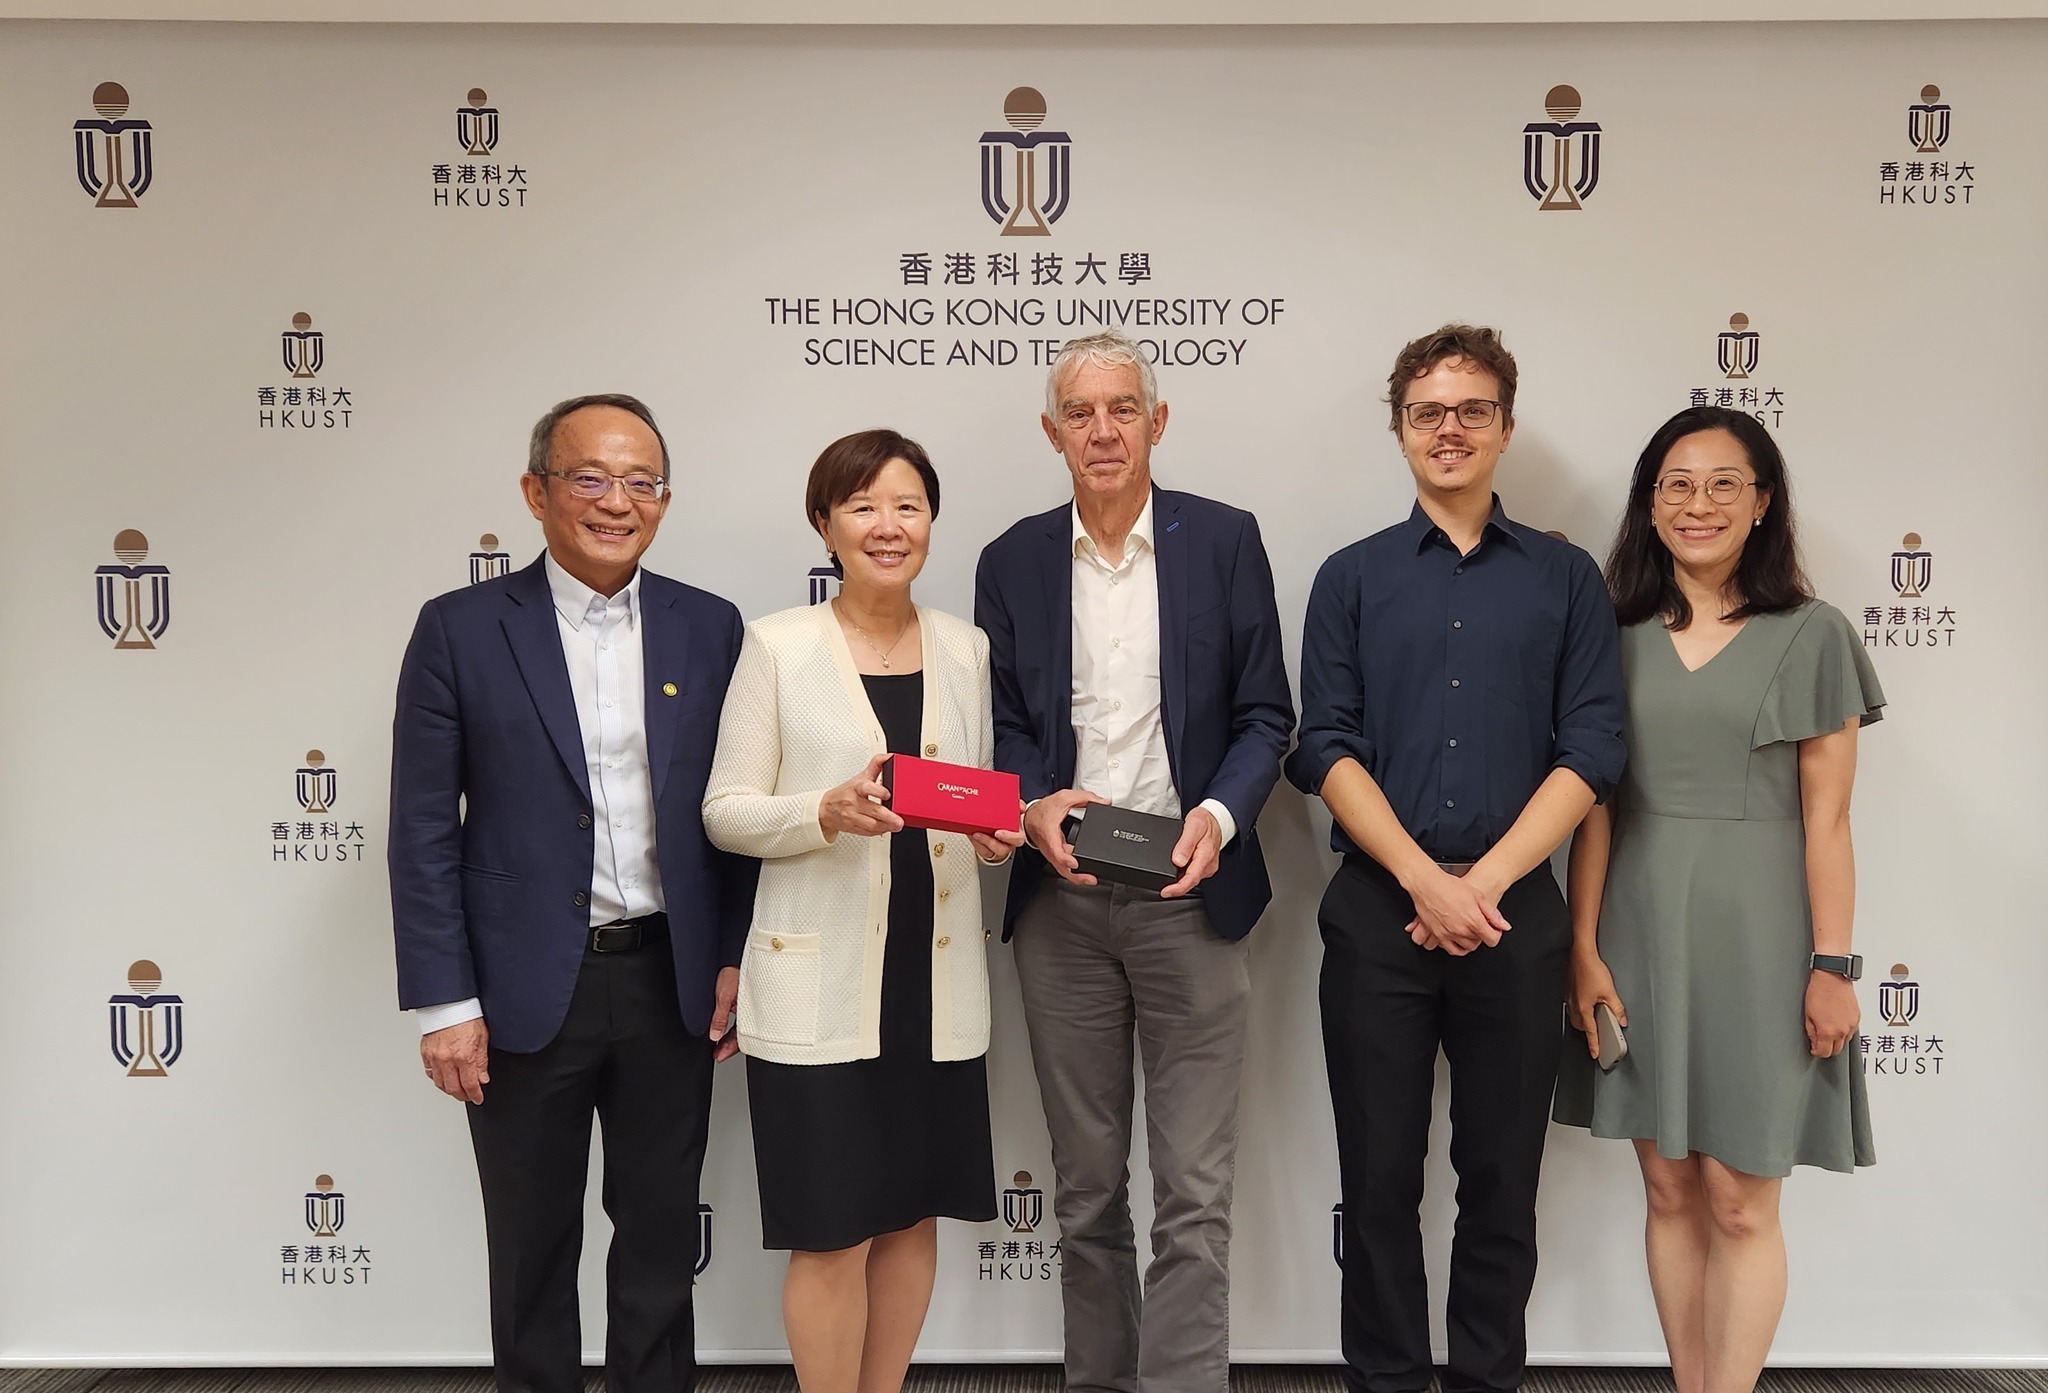 HKUST President Prof. Nancy IP (second left) and Vice-President for Research & Development Prof. Tim CHENG (first left) met with École Polytechnique Fédérale de Lausanne President Prof. Martin Vetterli, sharing updates on HKUST's latest developments and strong presence in the Greater Bay Area.